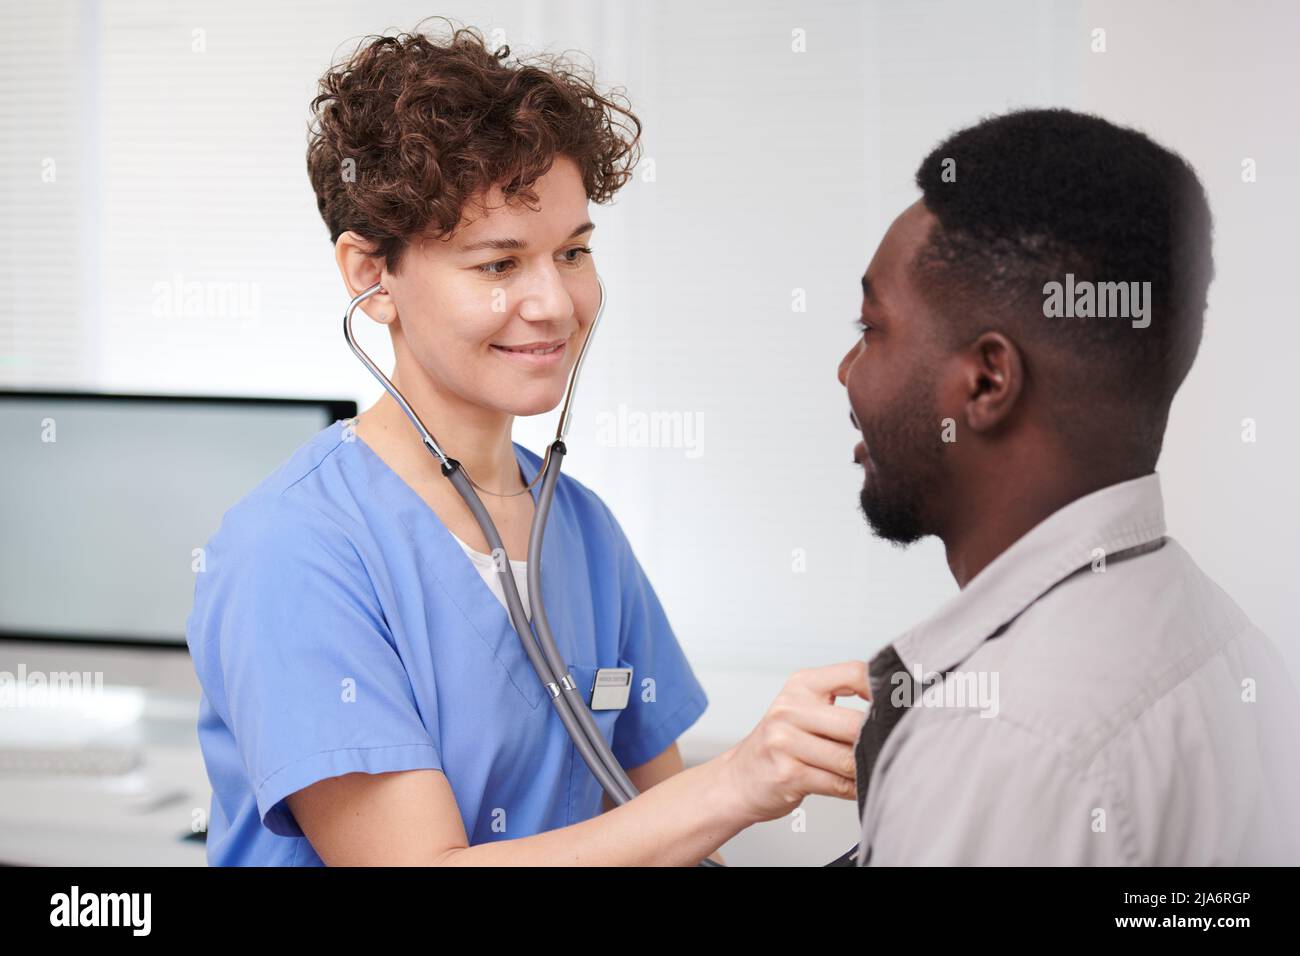 Horizontal medium close-up portrait of modern female doctor standing in front of male patient examining his heart beat and lungs using stethoscope Stock Photo